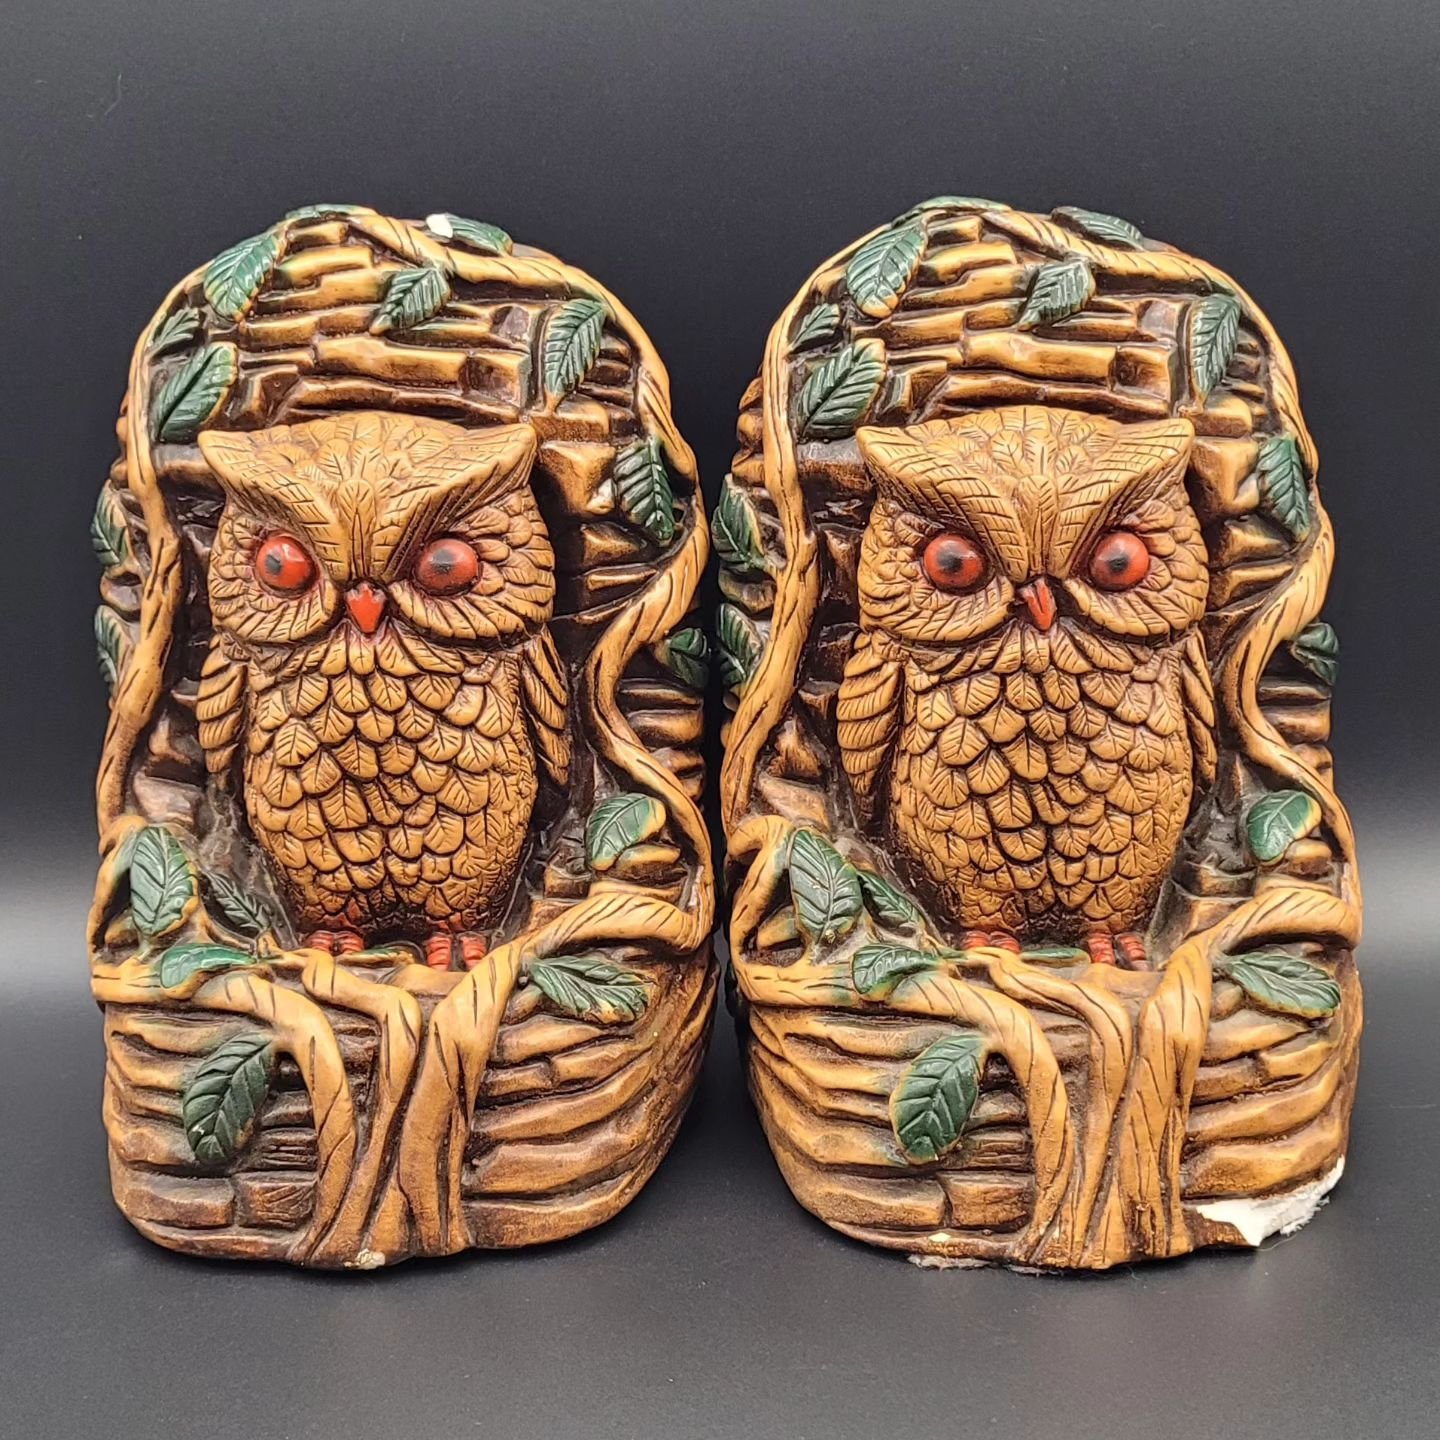 Pair of owl bookends

#owl #books #thrift